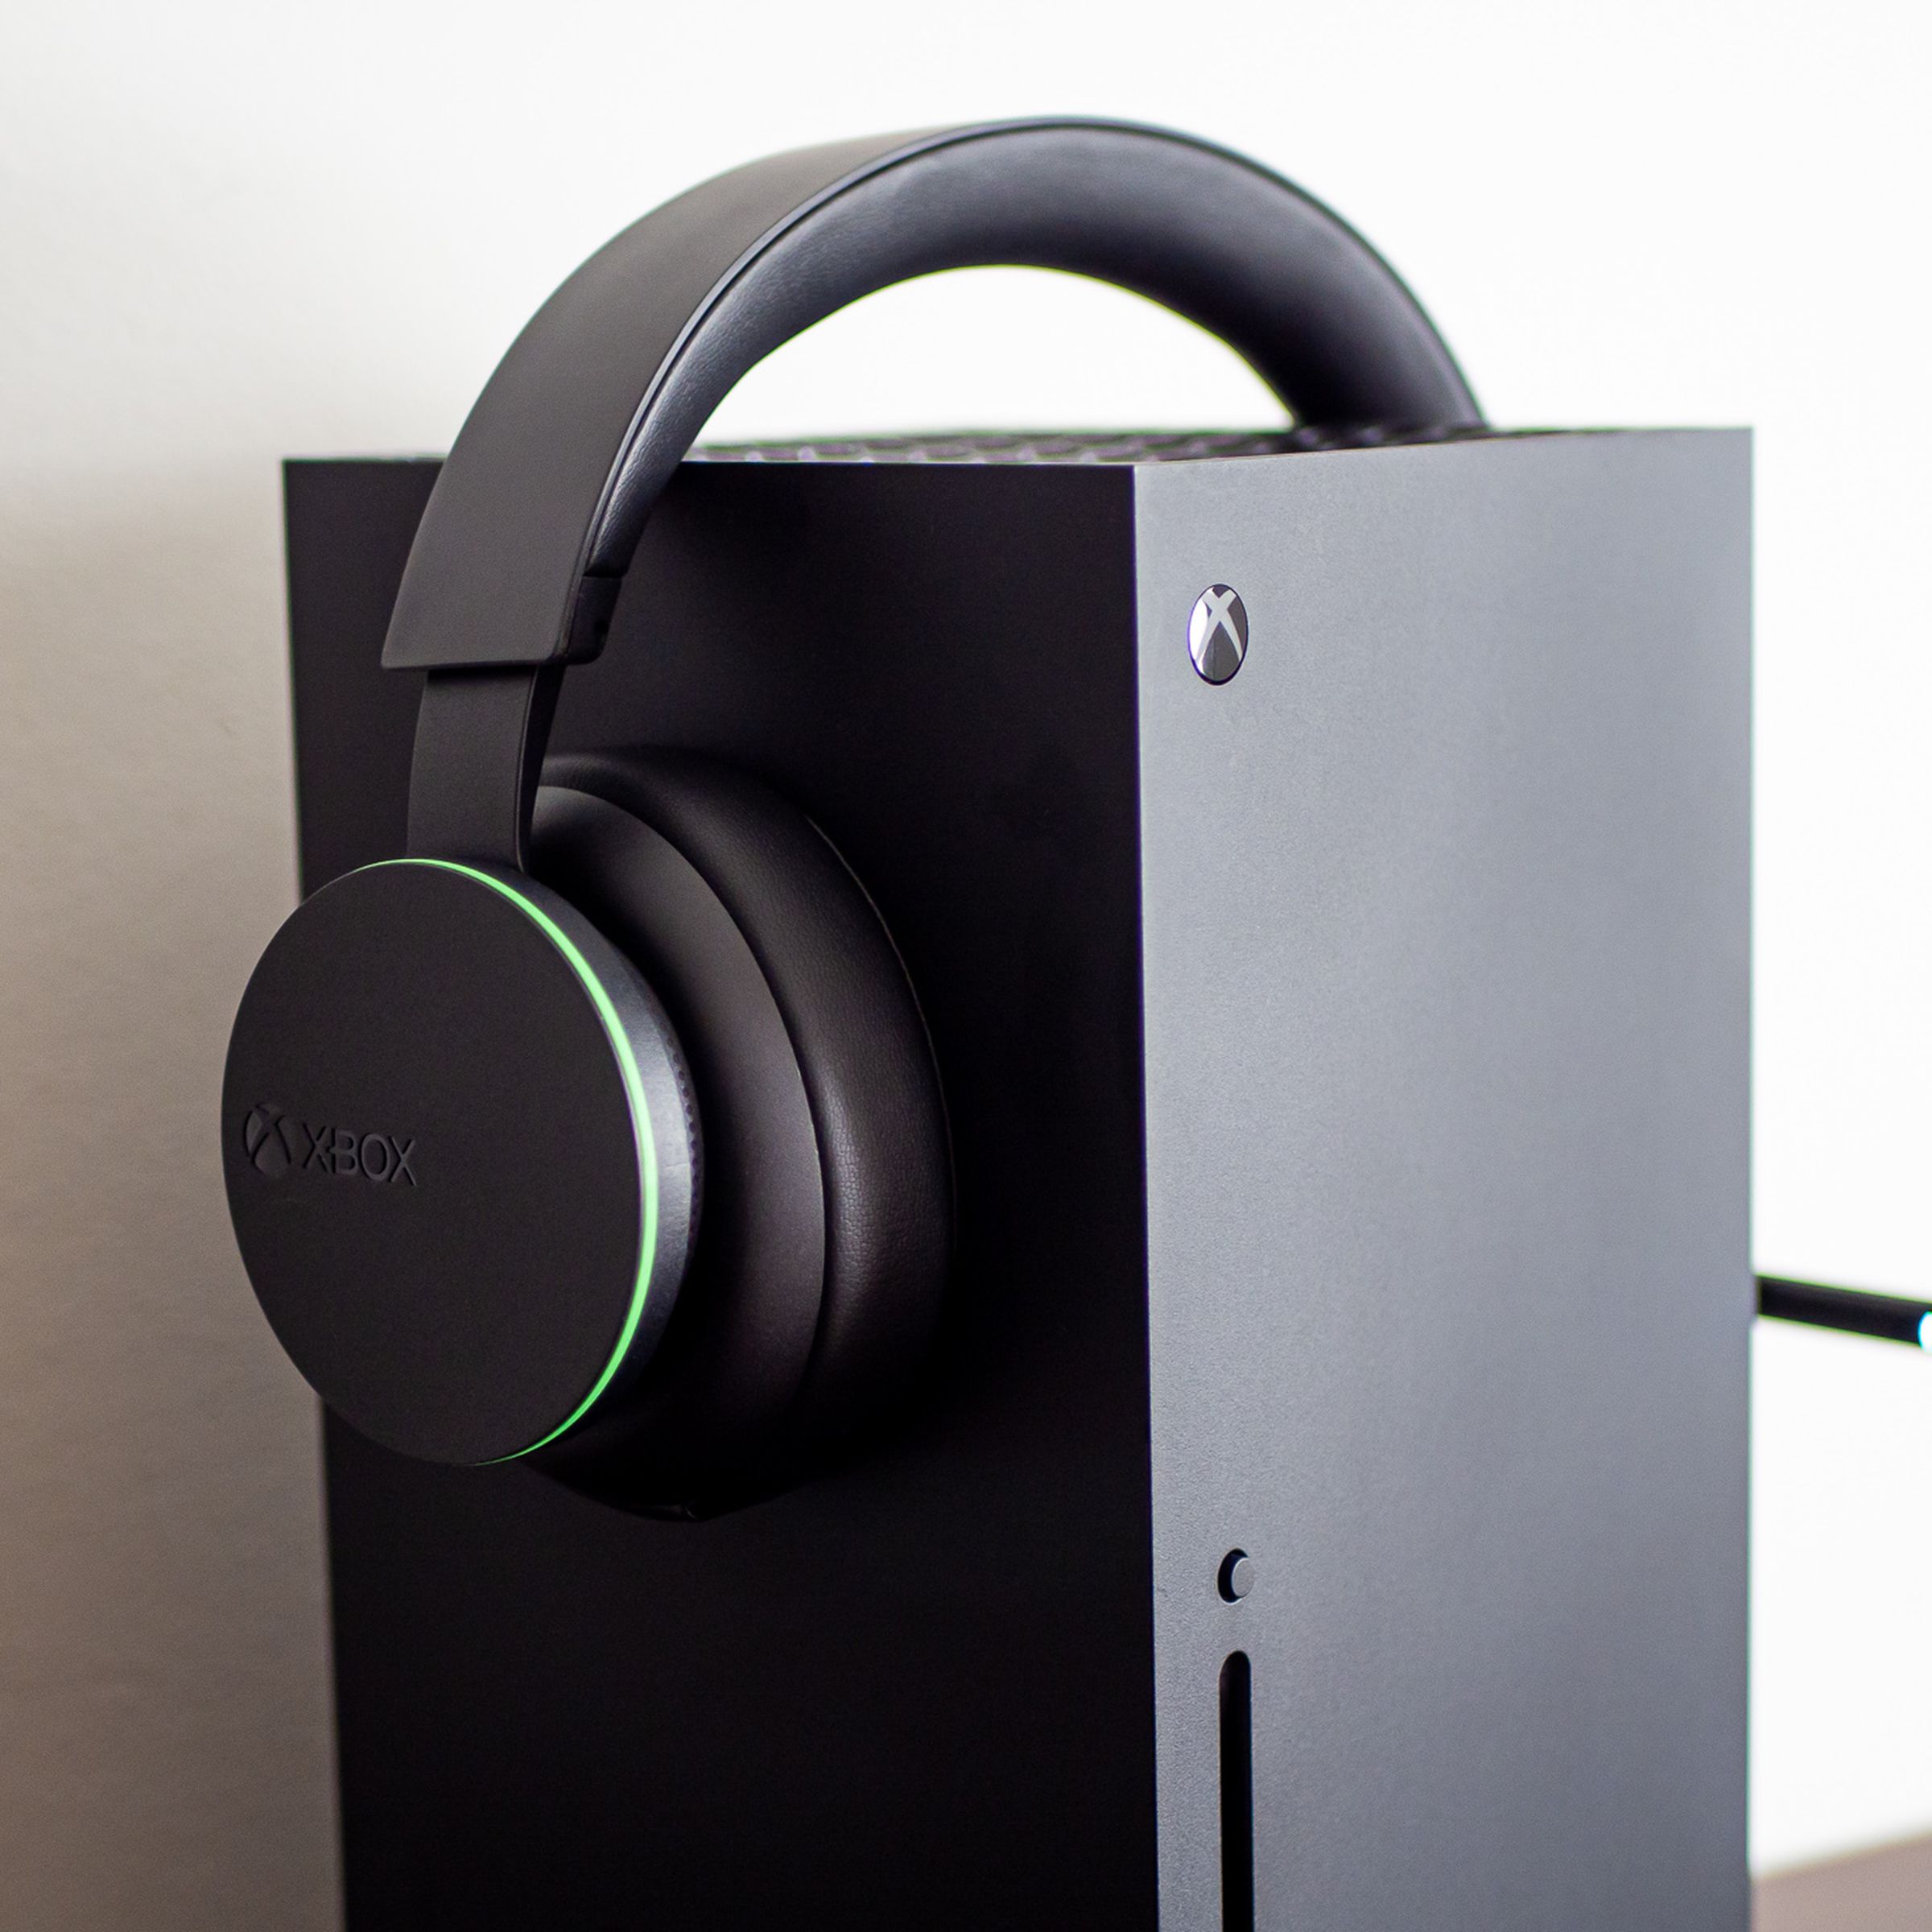 An Xbox wireless headset on top of an Xbox Series X console